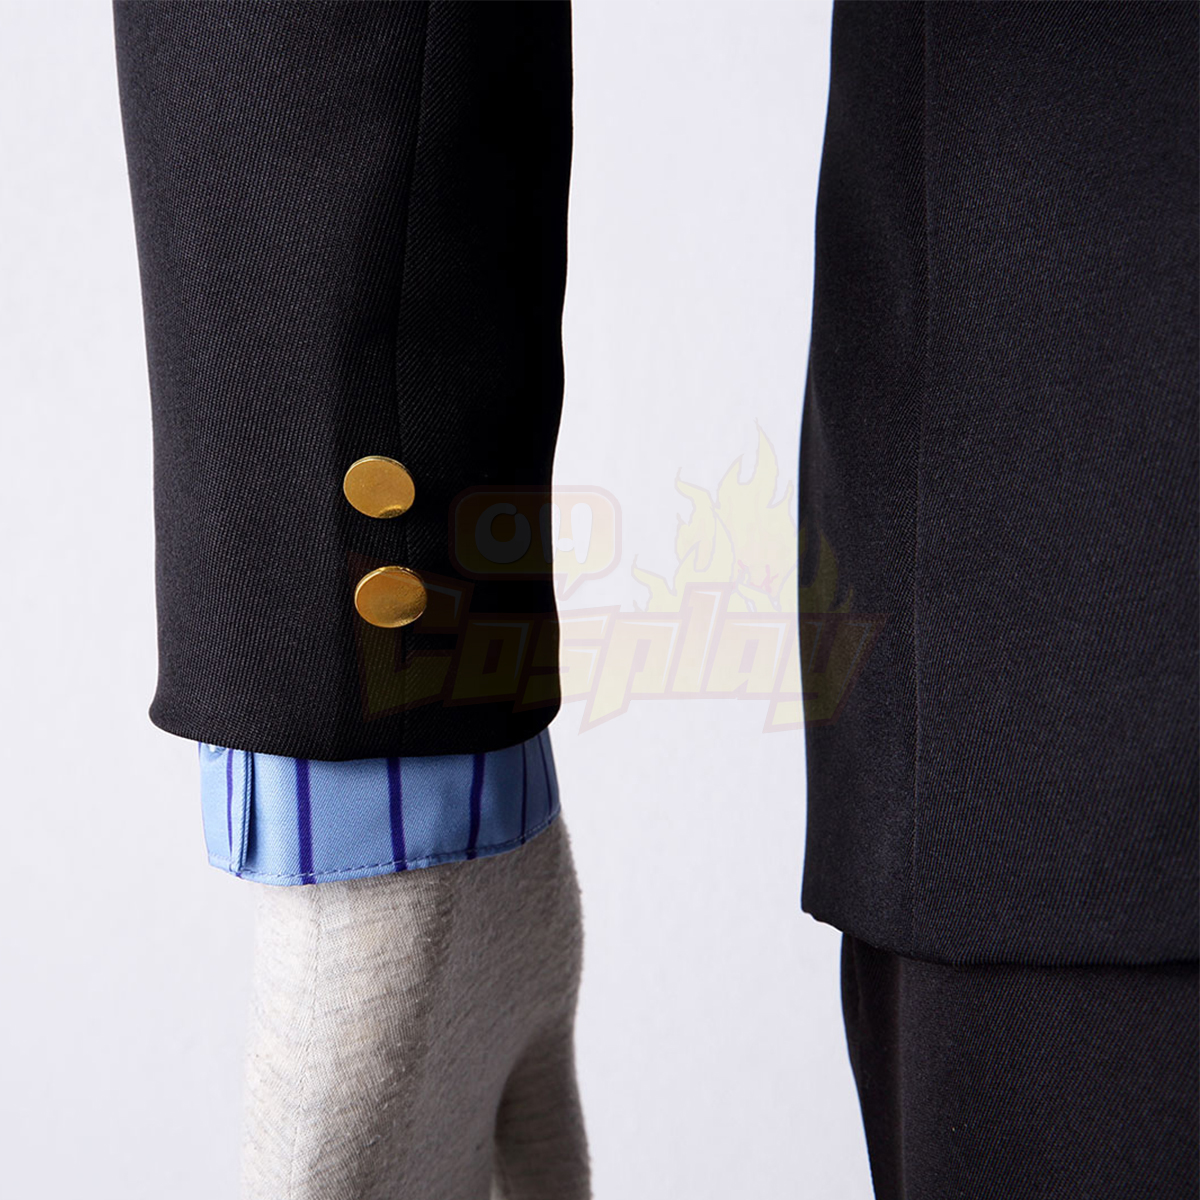 One Piece Sanji 1ST Cosplay Costumes Deluxe Edition